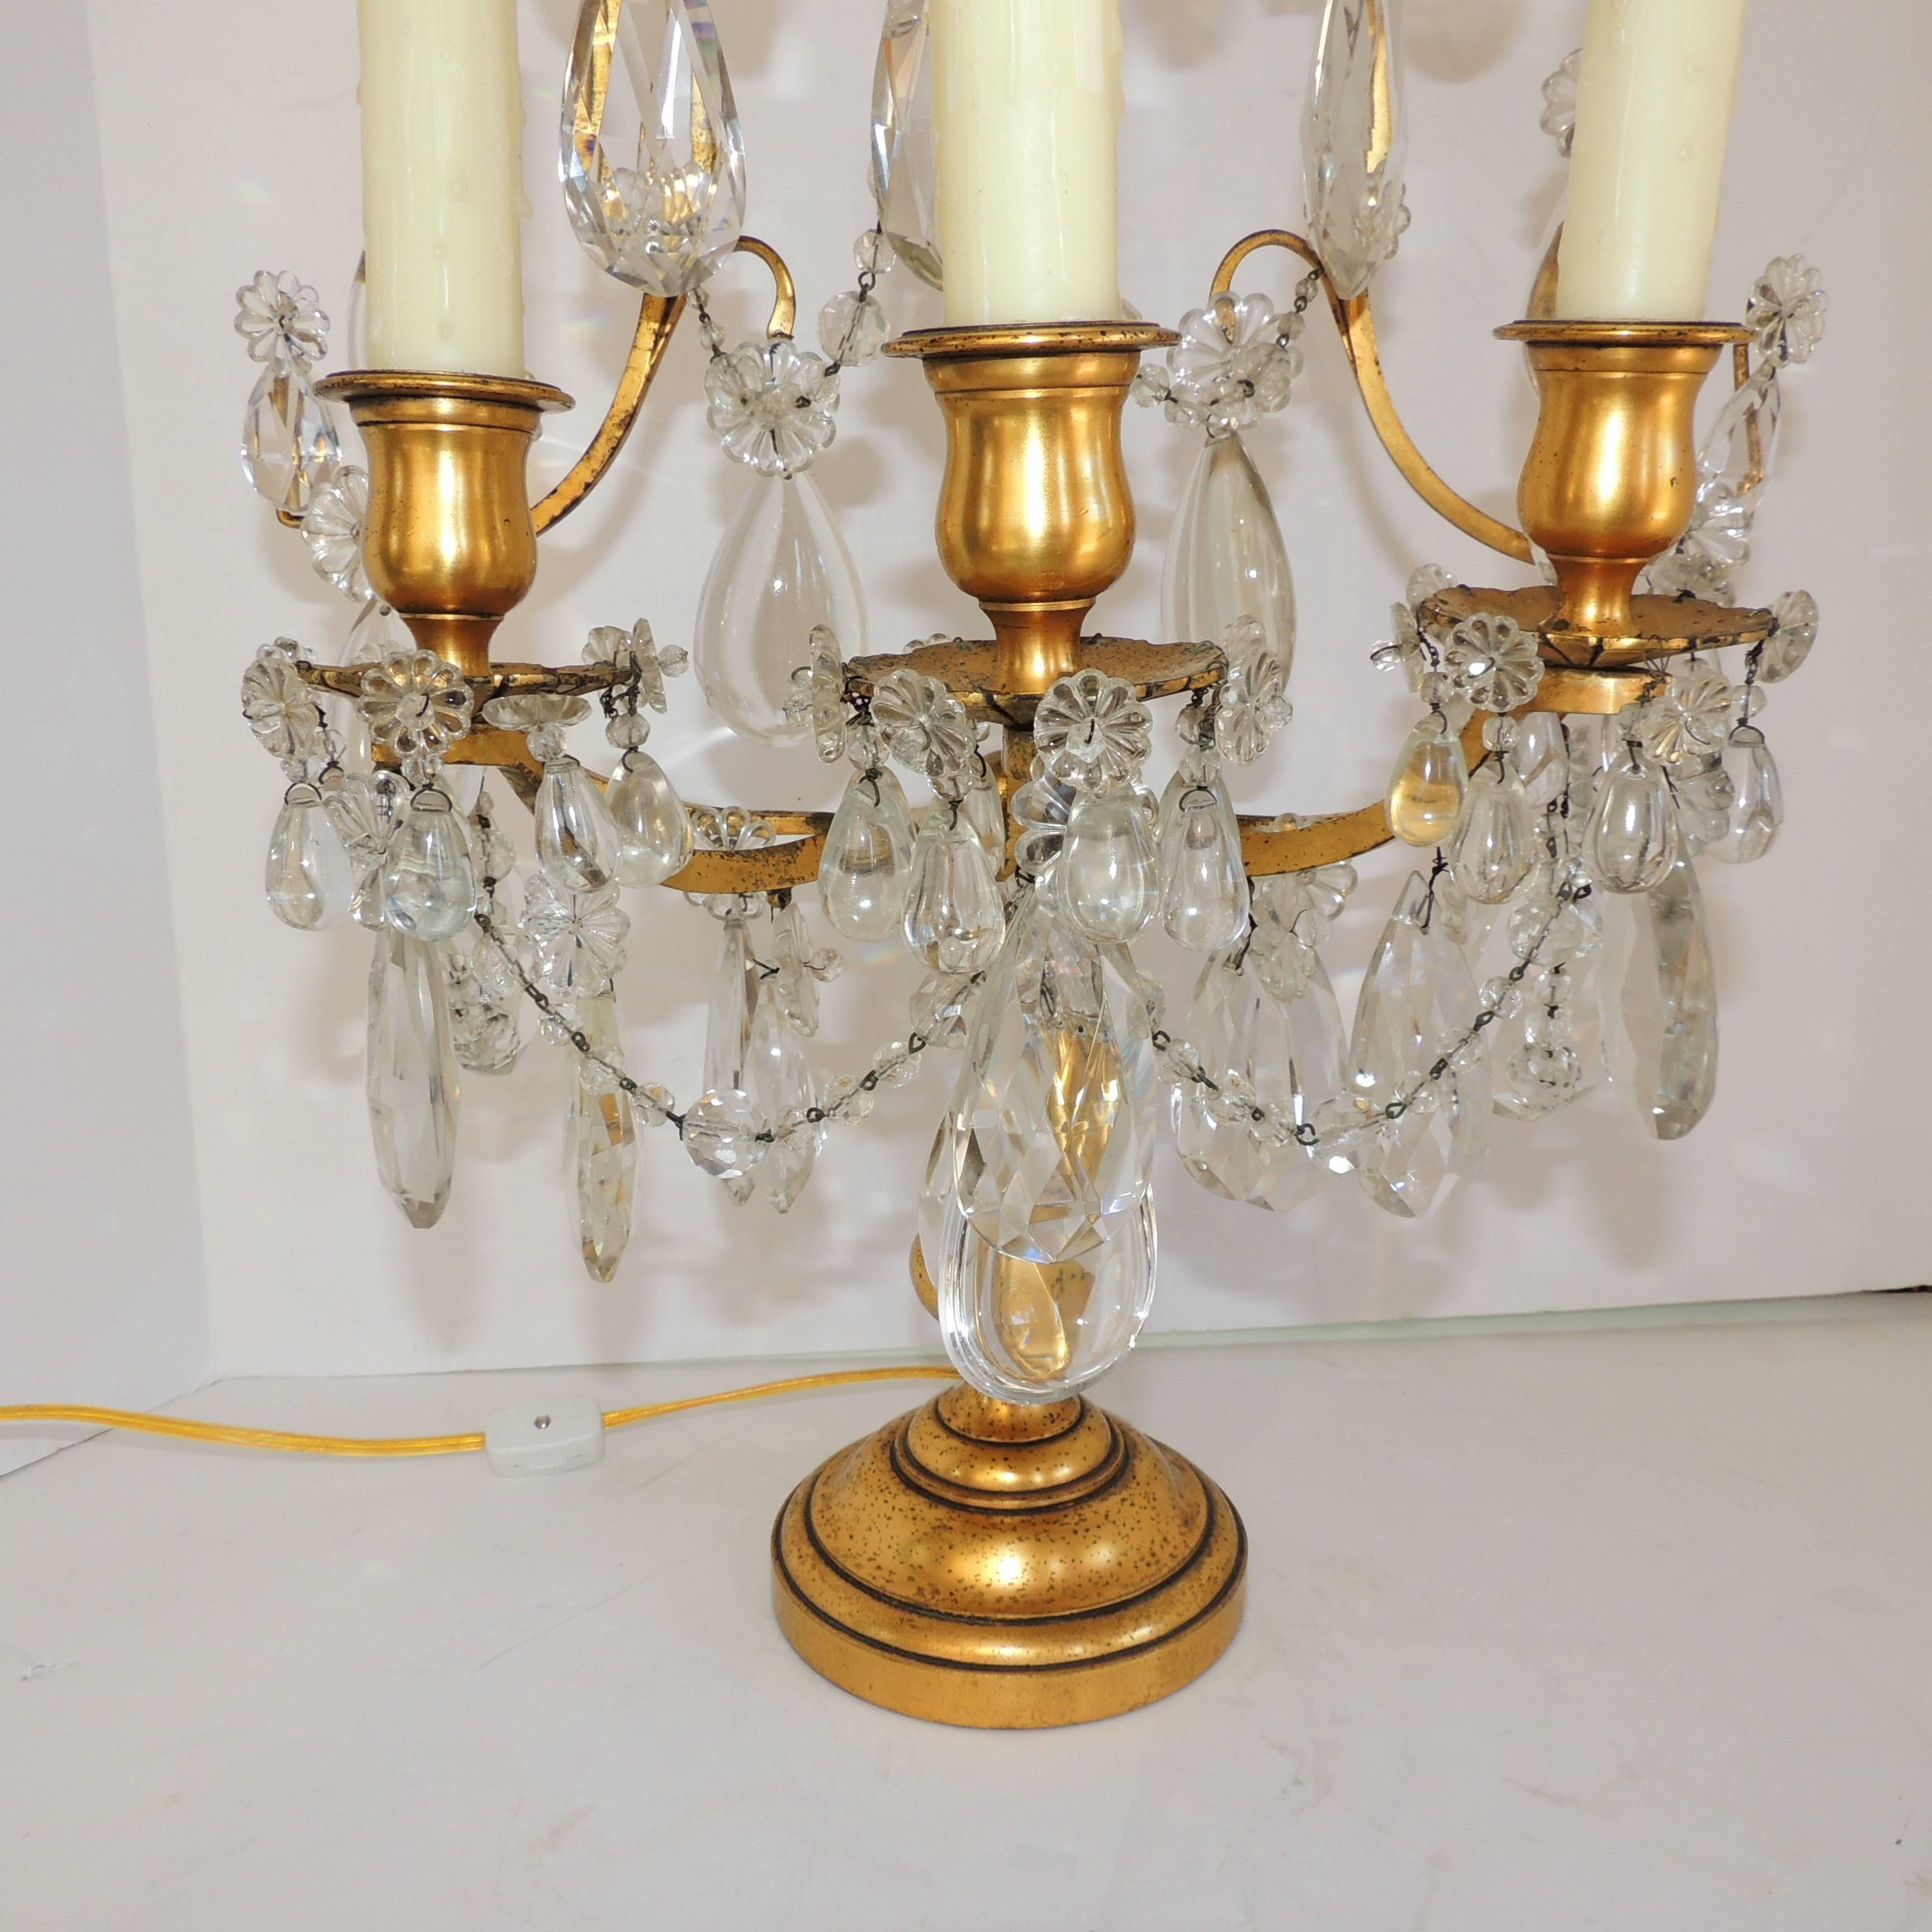 Mid-20th Century Pair of French Doré Bronze Crystal Girandoles Candelabras Three-Light Lamps For Sale